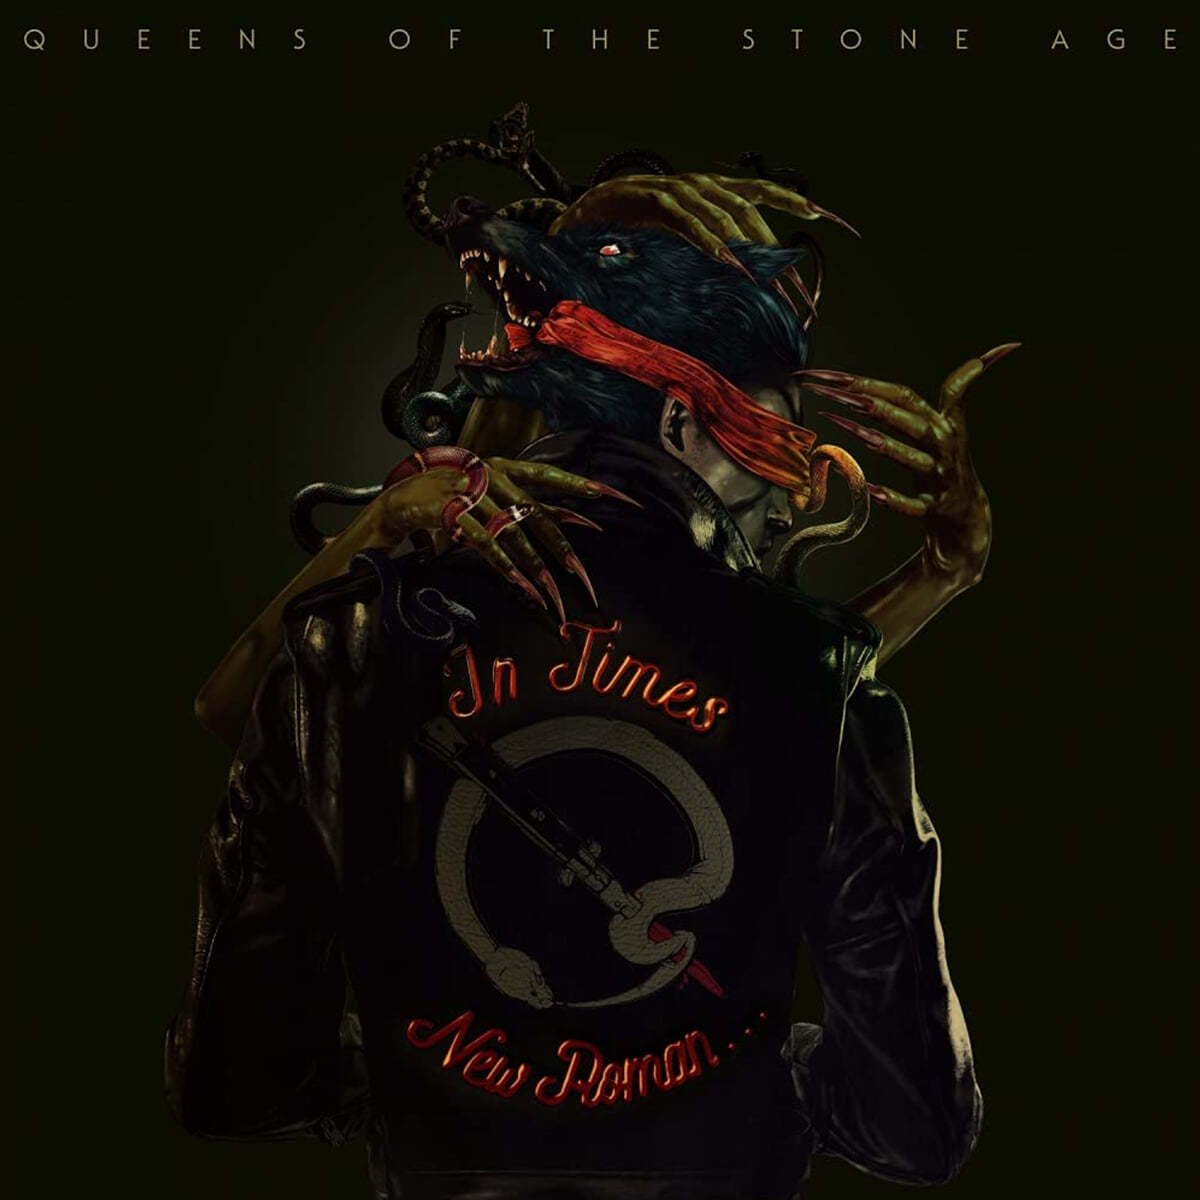 Queens of the Stone Age (퀸스 오브 더 스톤 에이지) - 8집 In Times New Roman… [실버 컬러 LP]